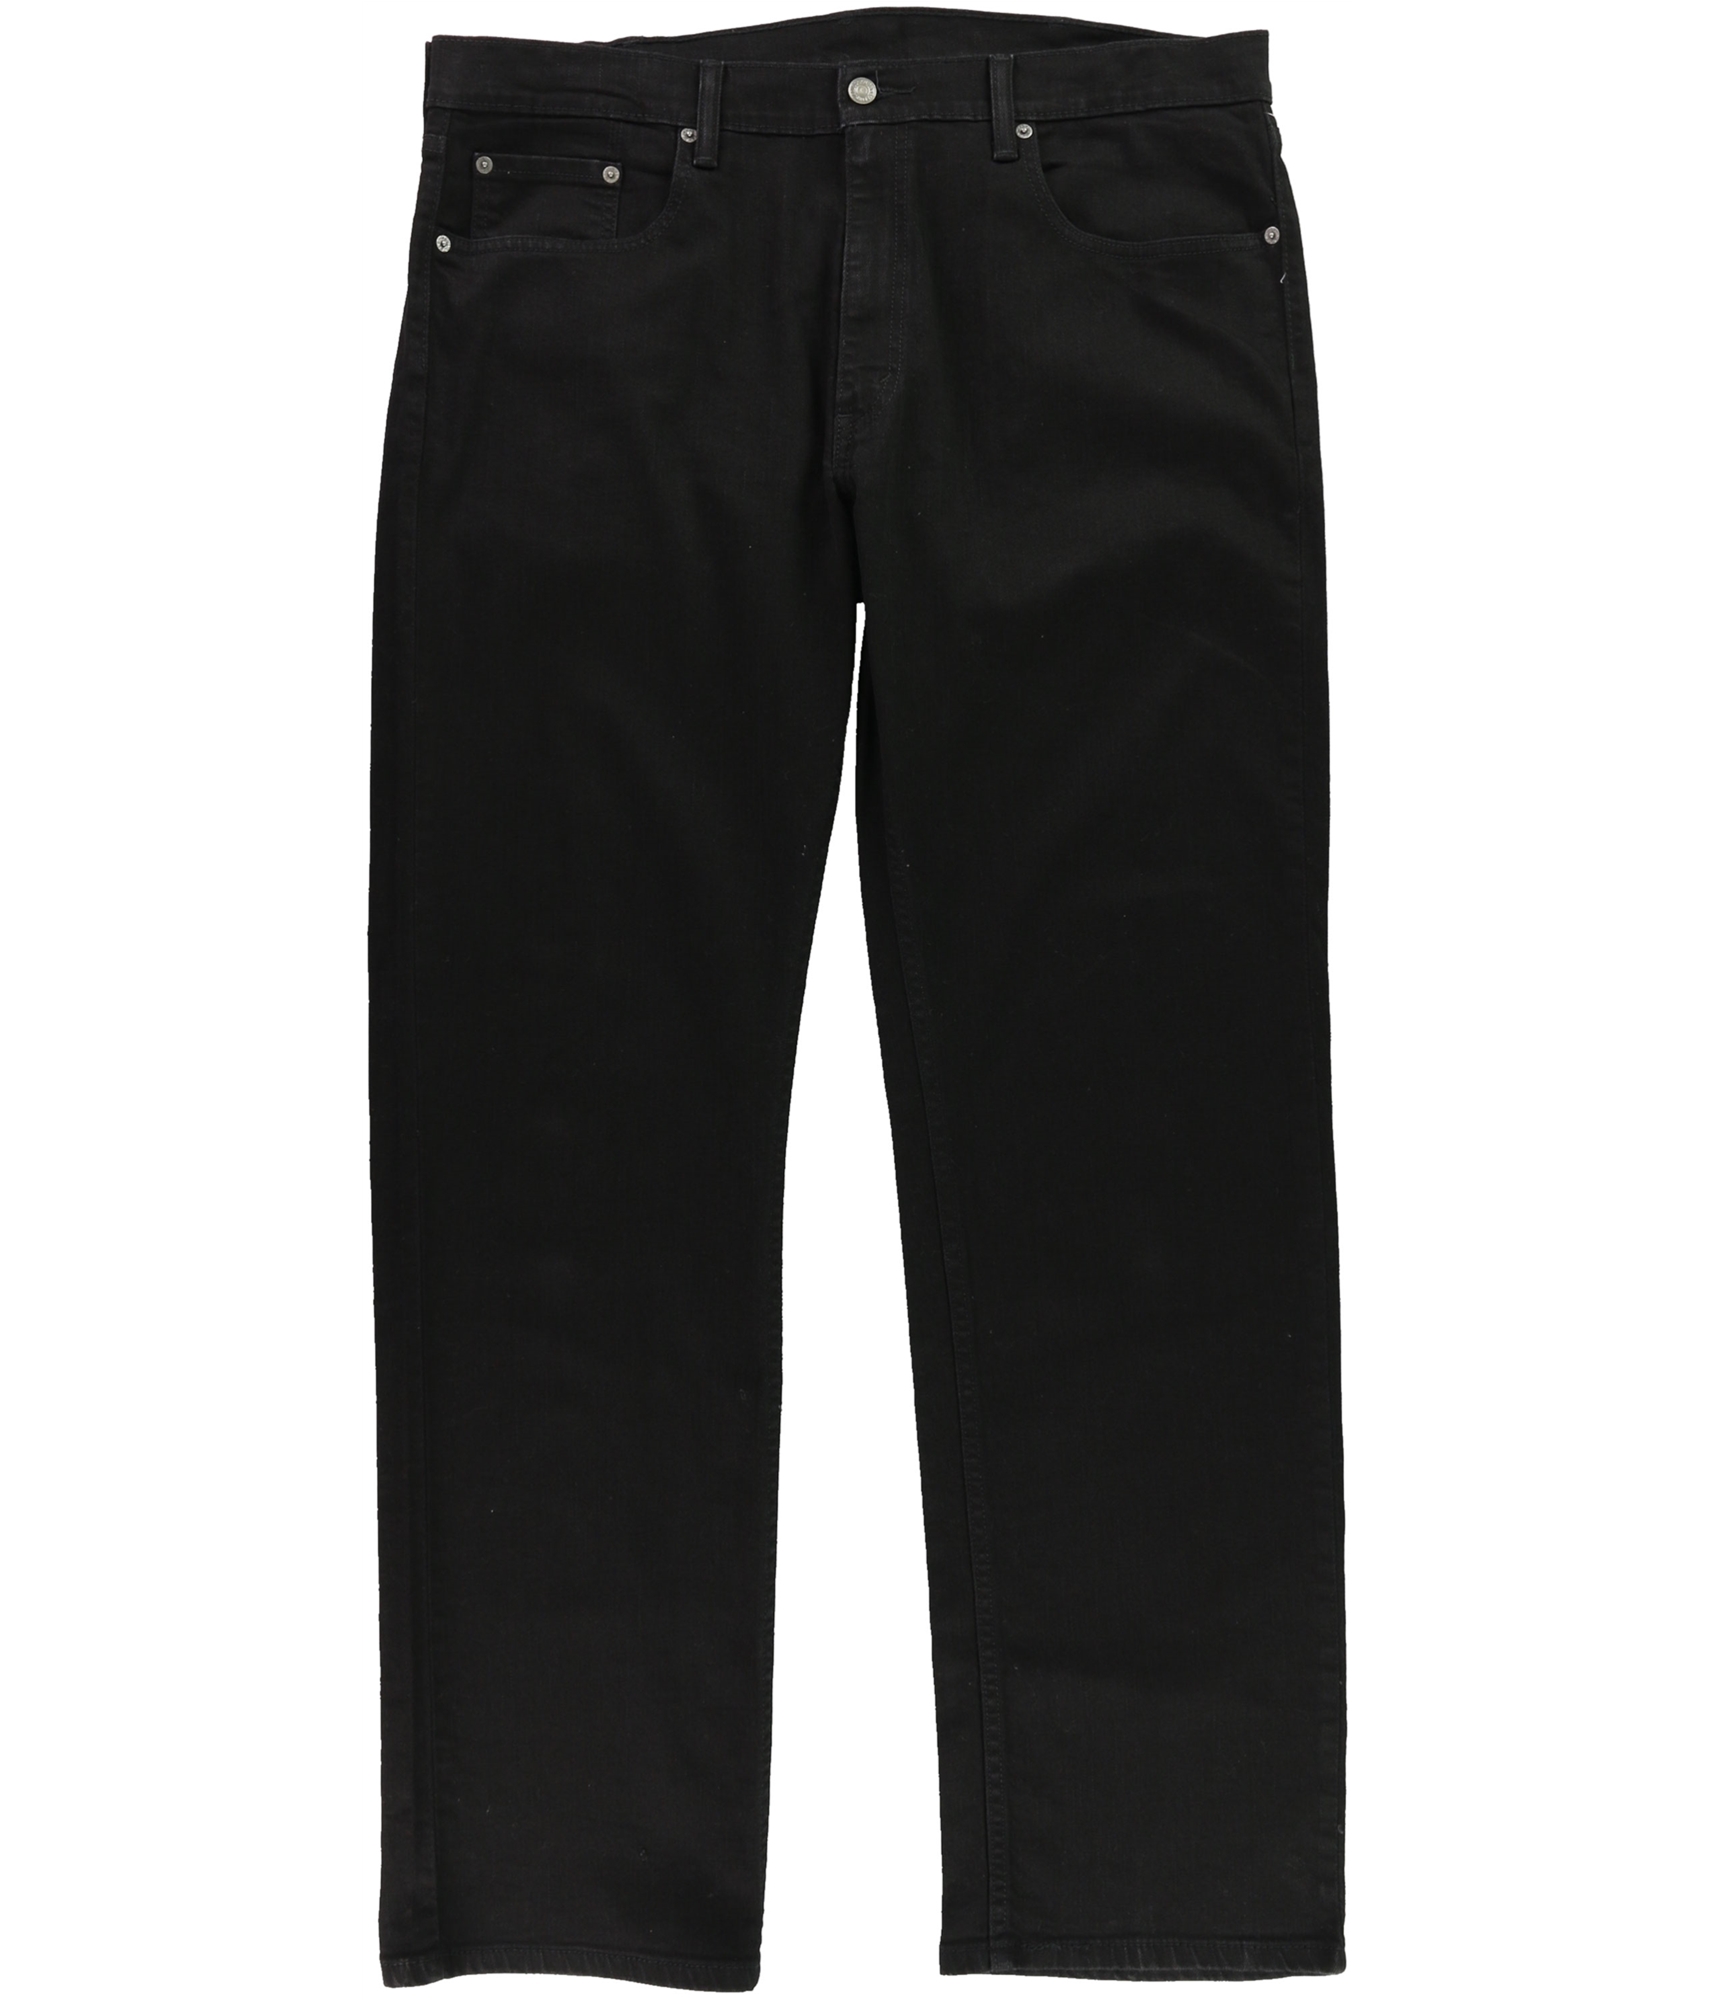 Levis Mens 559 Relaxed Straight Leg Jeans, Black, 32W x 32L 52175376299 ...